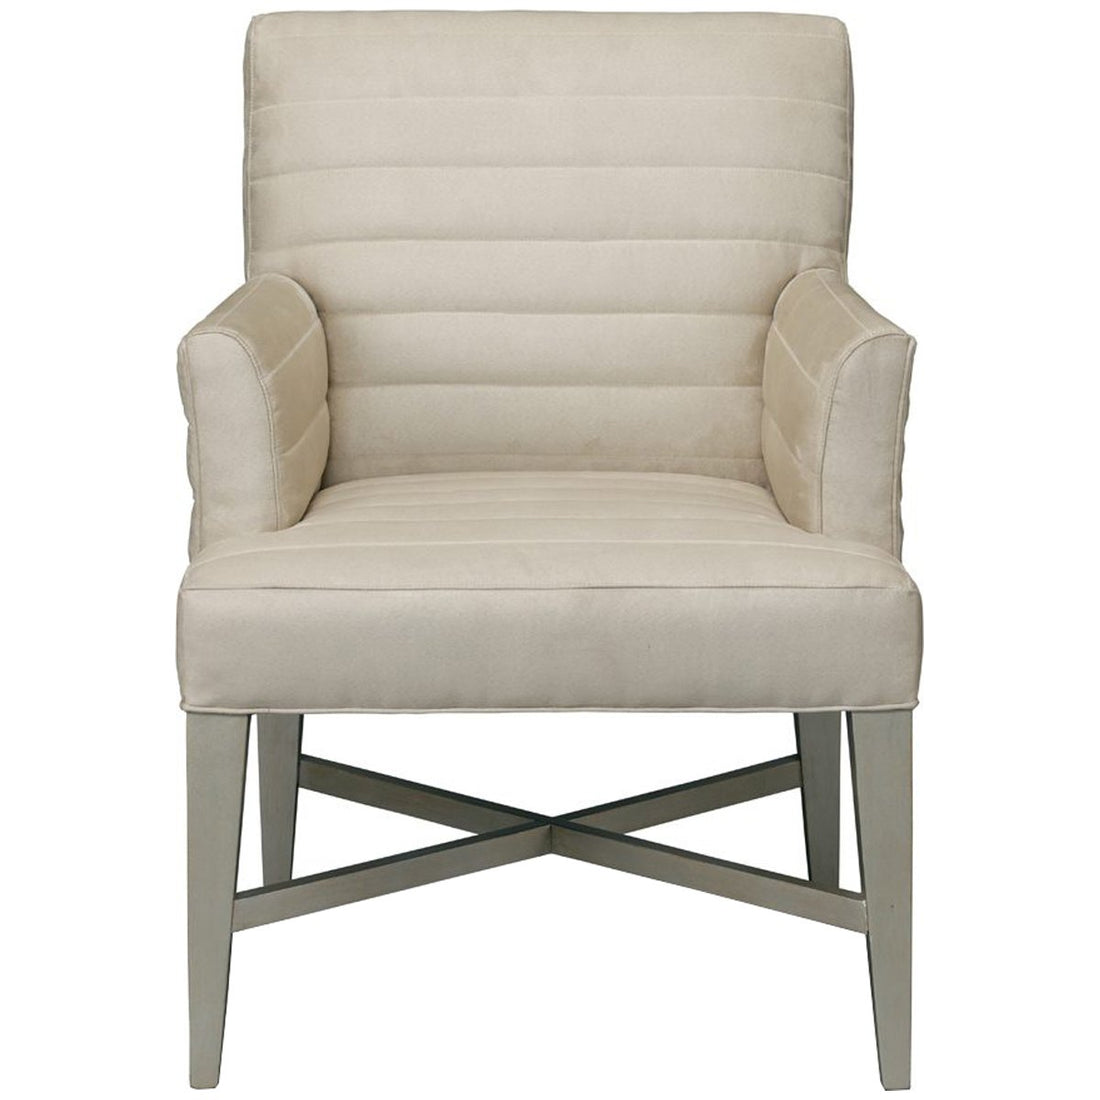 Hickory White Leather Platinum Arm Chair